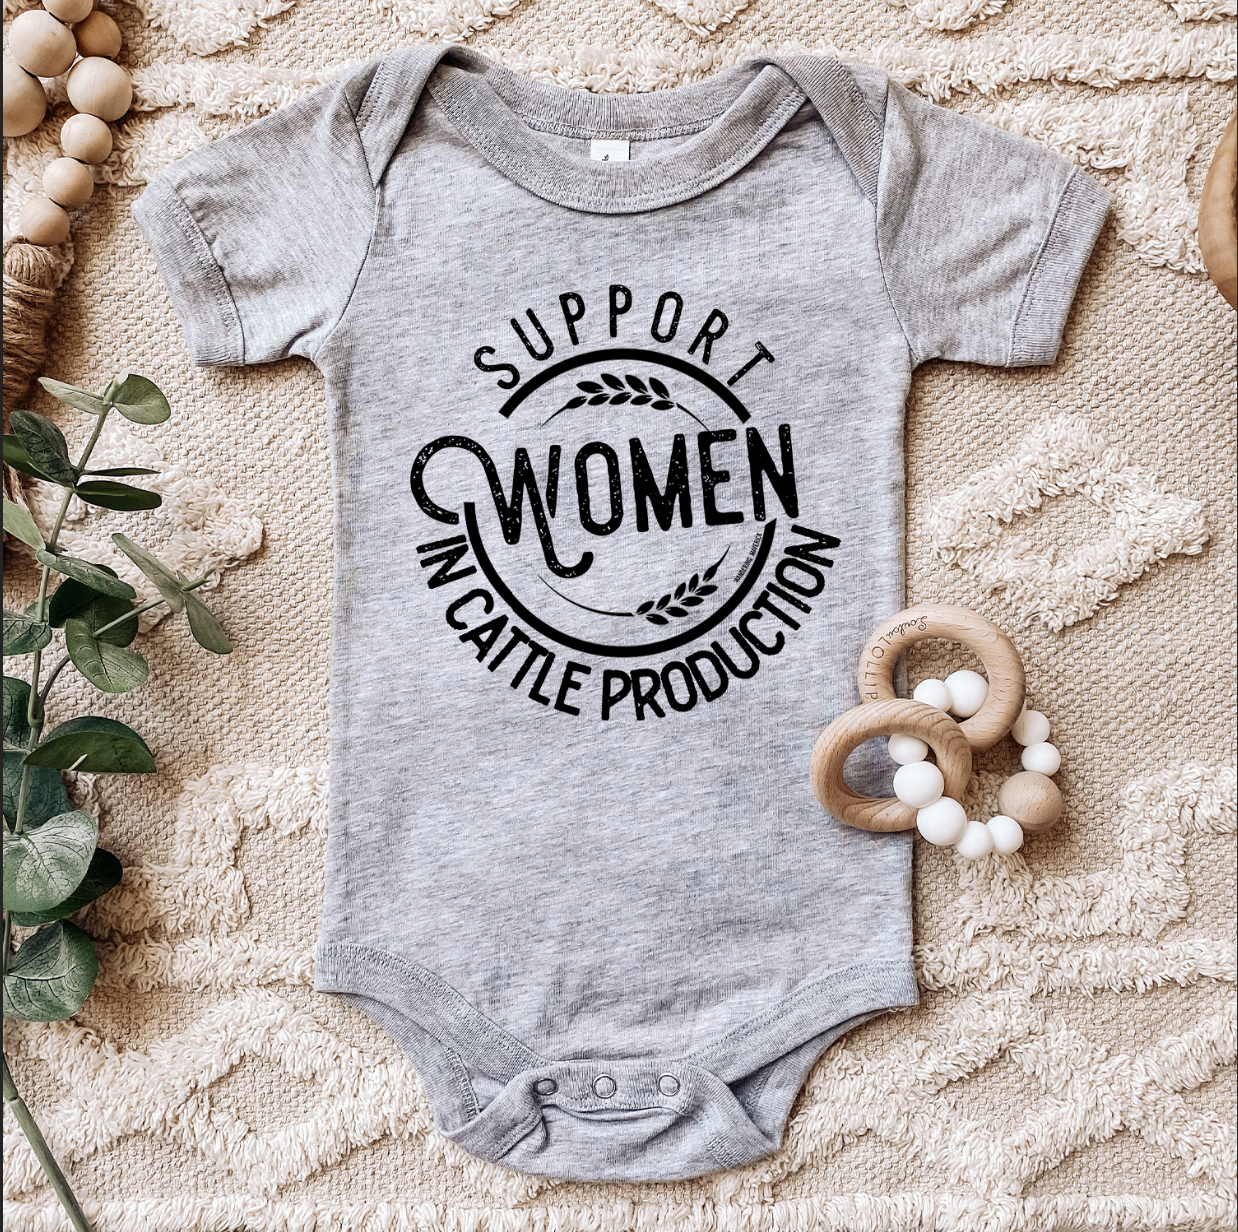 Support Women In Cattle Production One Piece/T-Shirt (Newborn - Youth XL) - Multiple Colors!